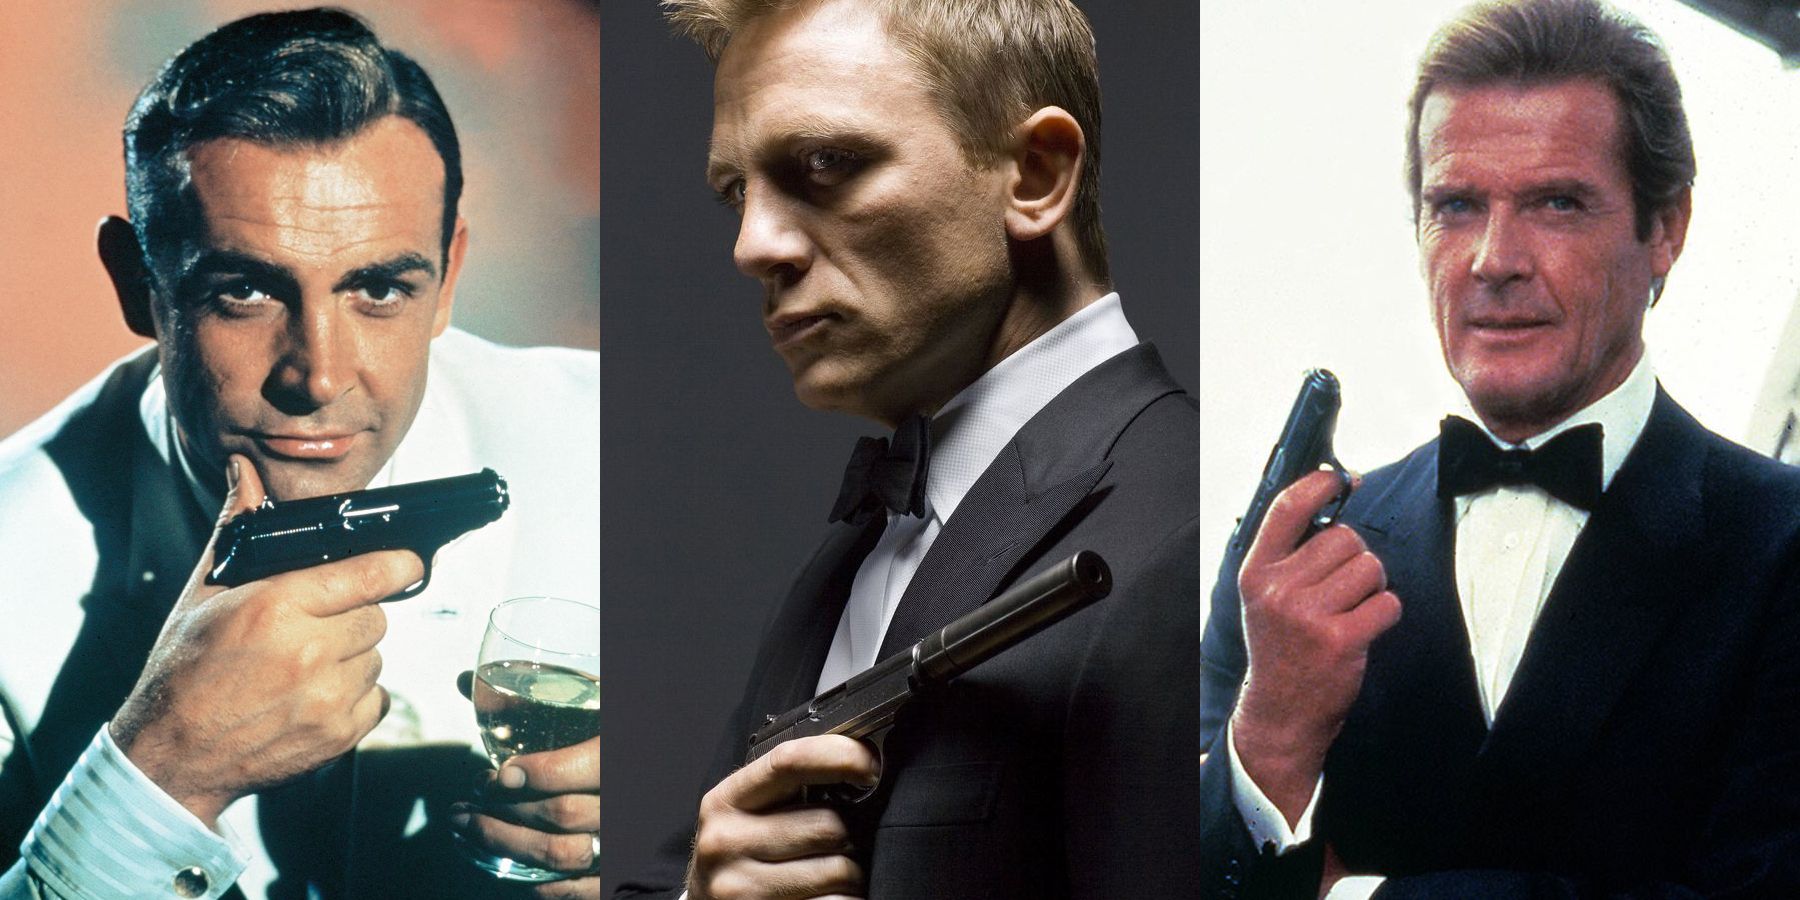 007 10 Facts About James Bond That Fans & Newcomers Need To Know